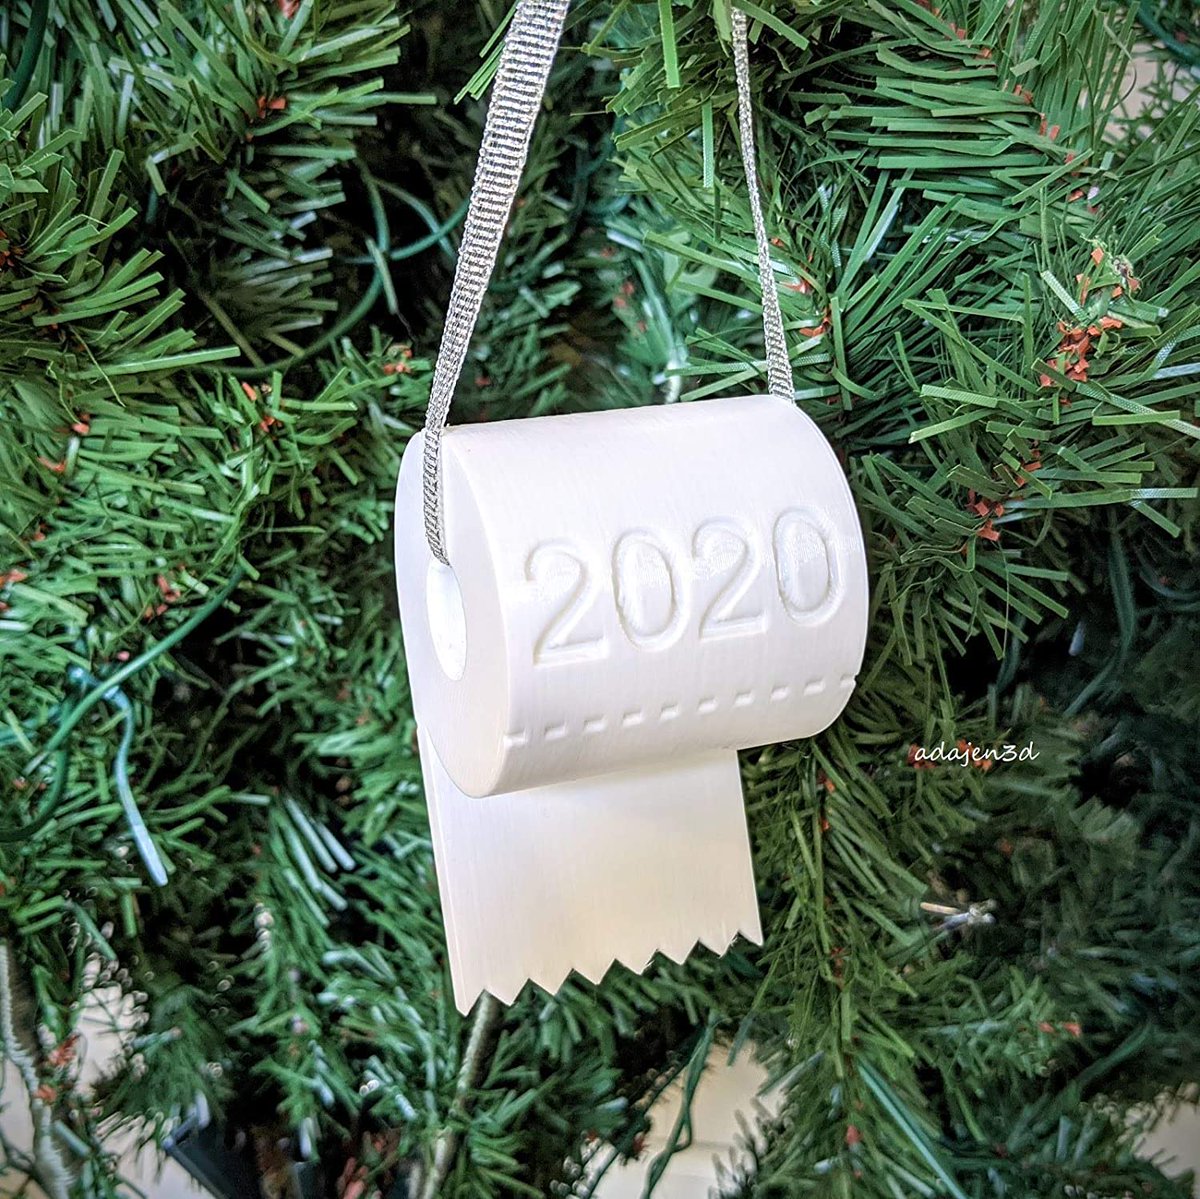 4. Certainly it was an eventful year, but if you went by Christmas ornaments alone, you might forget there's a global pandemic on, for it seems that the most significant event of the year was a *dire shortage of toilet paper.*